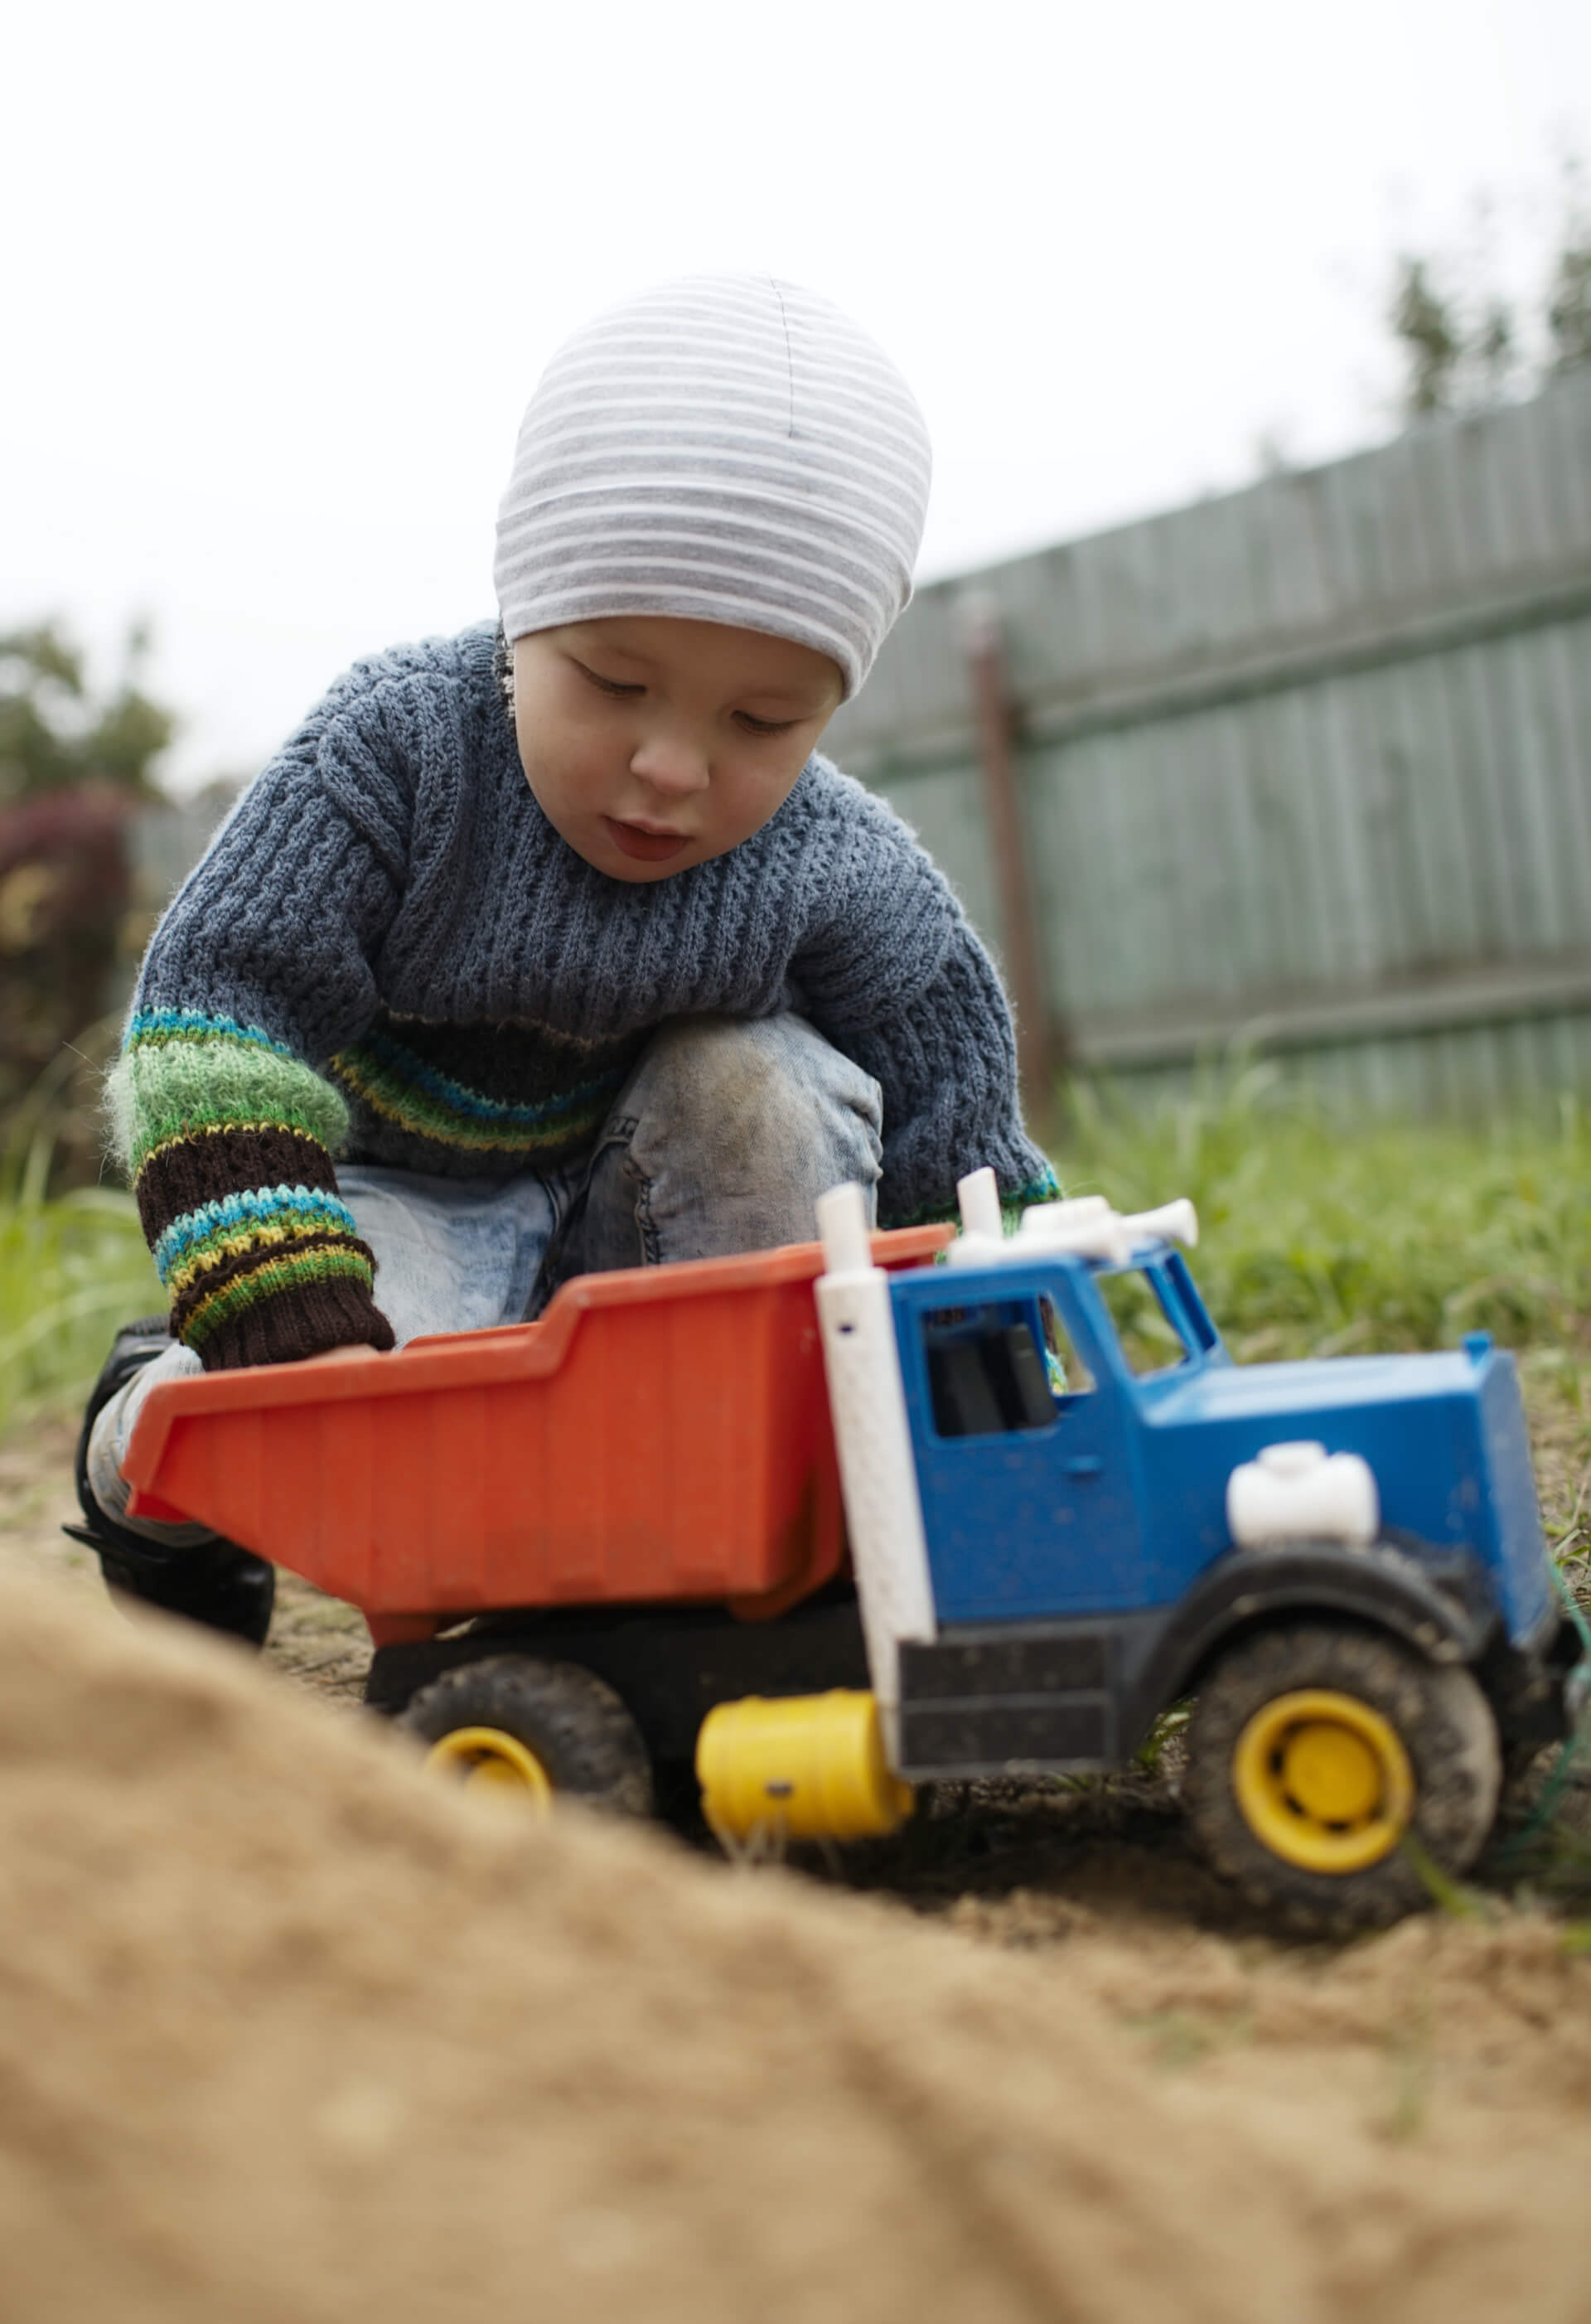 Tips for Protecting Your Children From Potentially Defective Toys